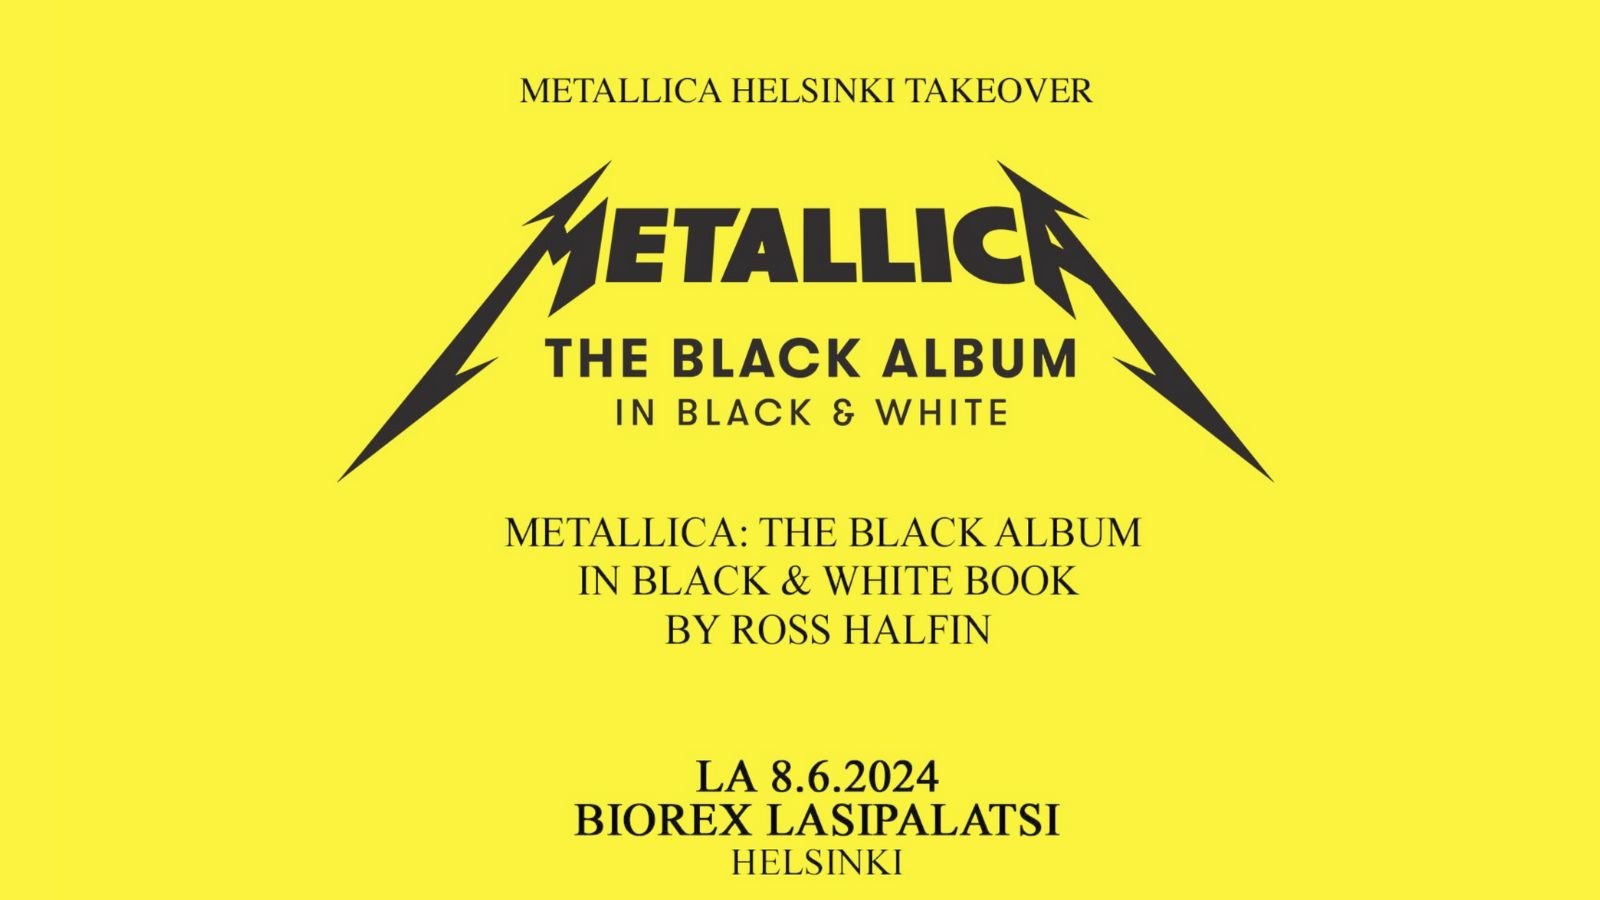 <p><span>With more than four decades as a band, <a href="https://metalshout.com/greatest-moments-from-the-entire-career-of-metallica/">Metallica can be considered metal's biggest act</a>. Well, they embarked on the M72 World Tour with a premise: playing </span><a href="https://blabbermouth.net/news/lars-ulrich-doesnt-know-if-everybody-understands-what-metallica-is-doing-with-no-repeat-weekend-concept"><span>no-repeat weekends</span></a><span>. This means setlists change every night. Although you might miss a hit or two, you'll surely hear those forgotten pearls in their discography.</span></p> <ul>   <li><span>Starts on May 26th in Munich, Germany</span></li>   <li><span>Ends on September 29th in Mexico City, Mexico</span></li>  </ul> <p><span>Full tour dates and tickets </span><a href="https://www.metallica.com/tour"><span>here.</span></a></p>